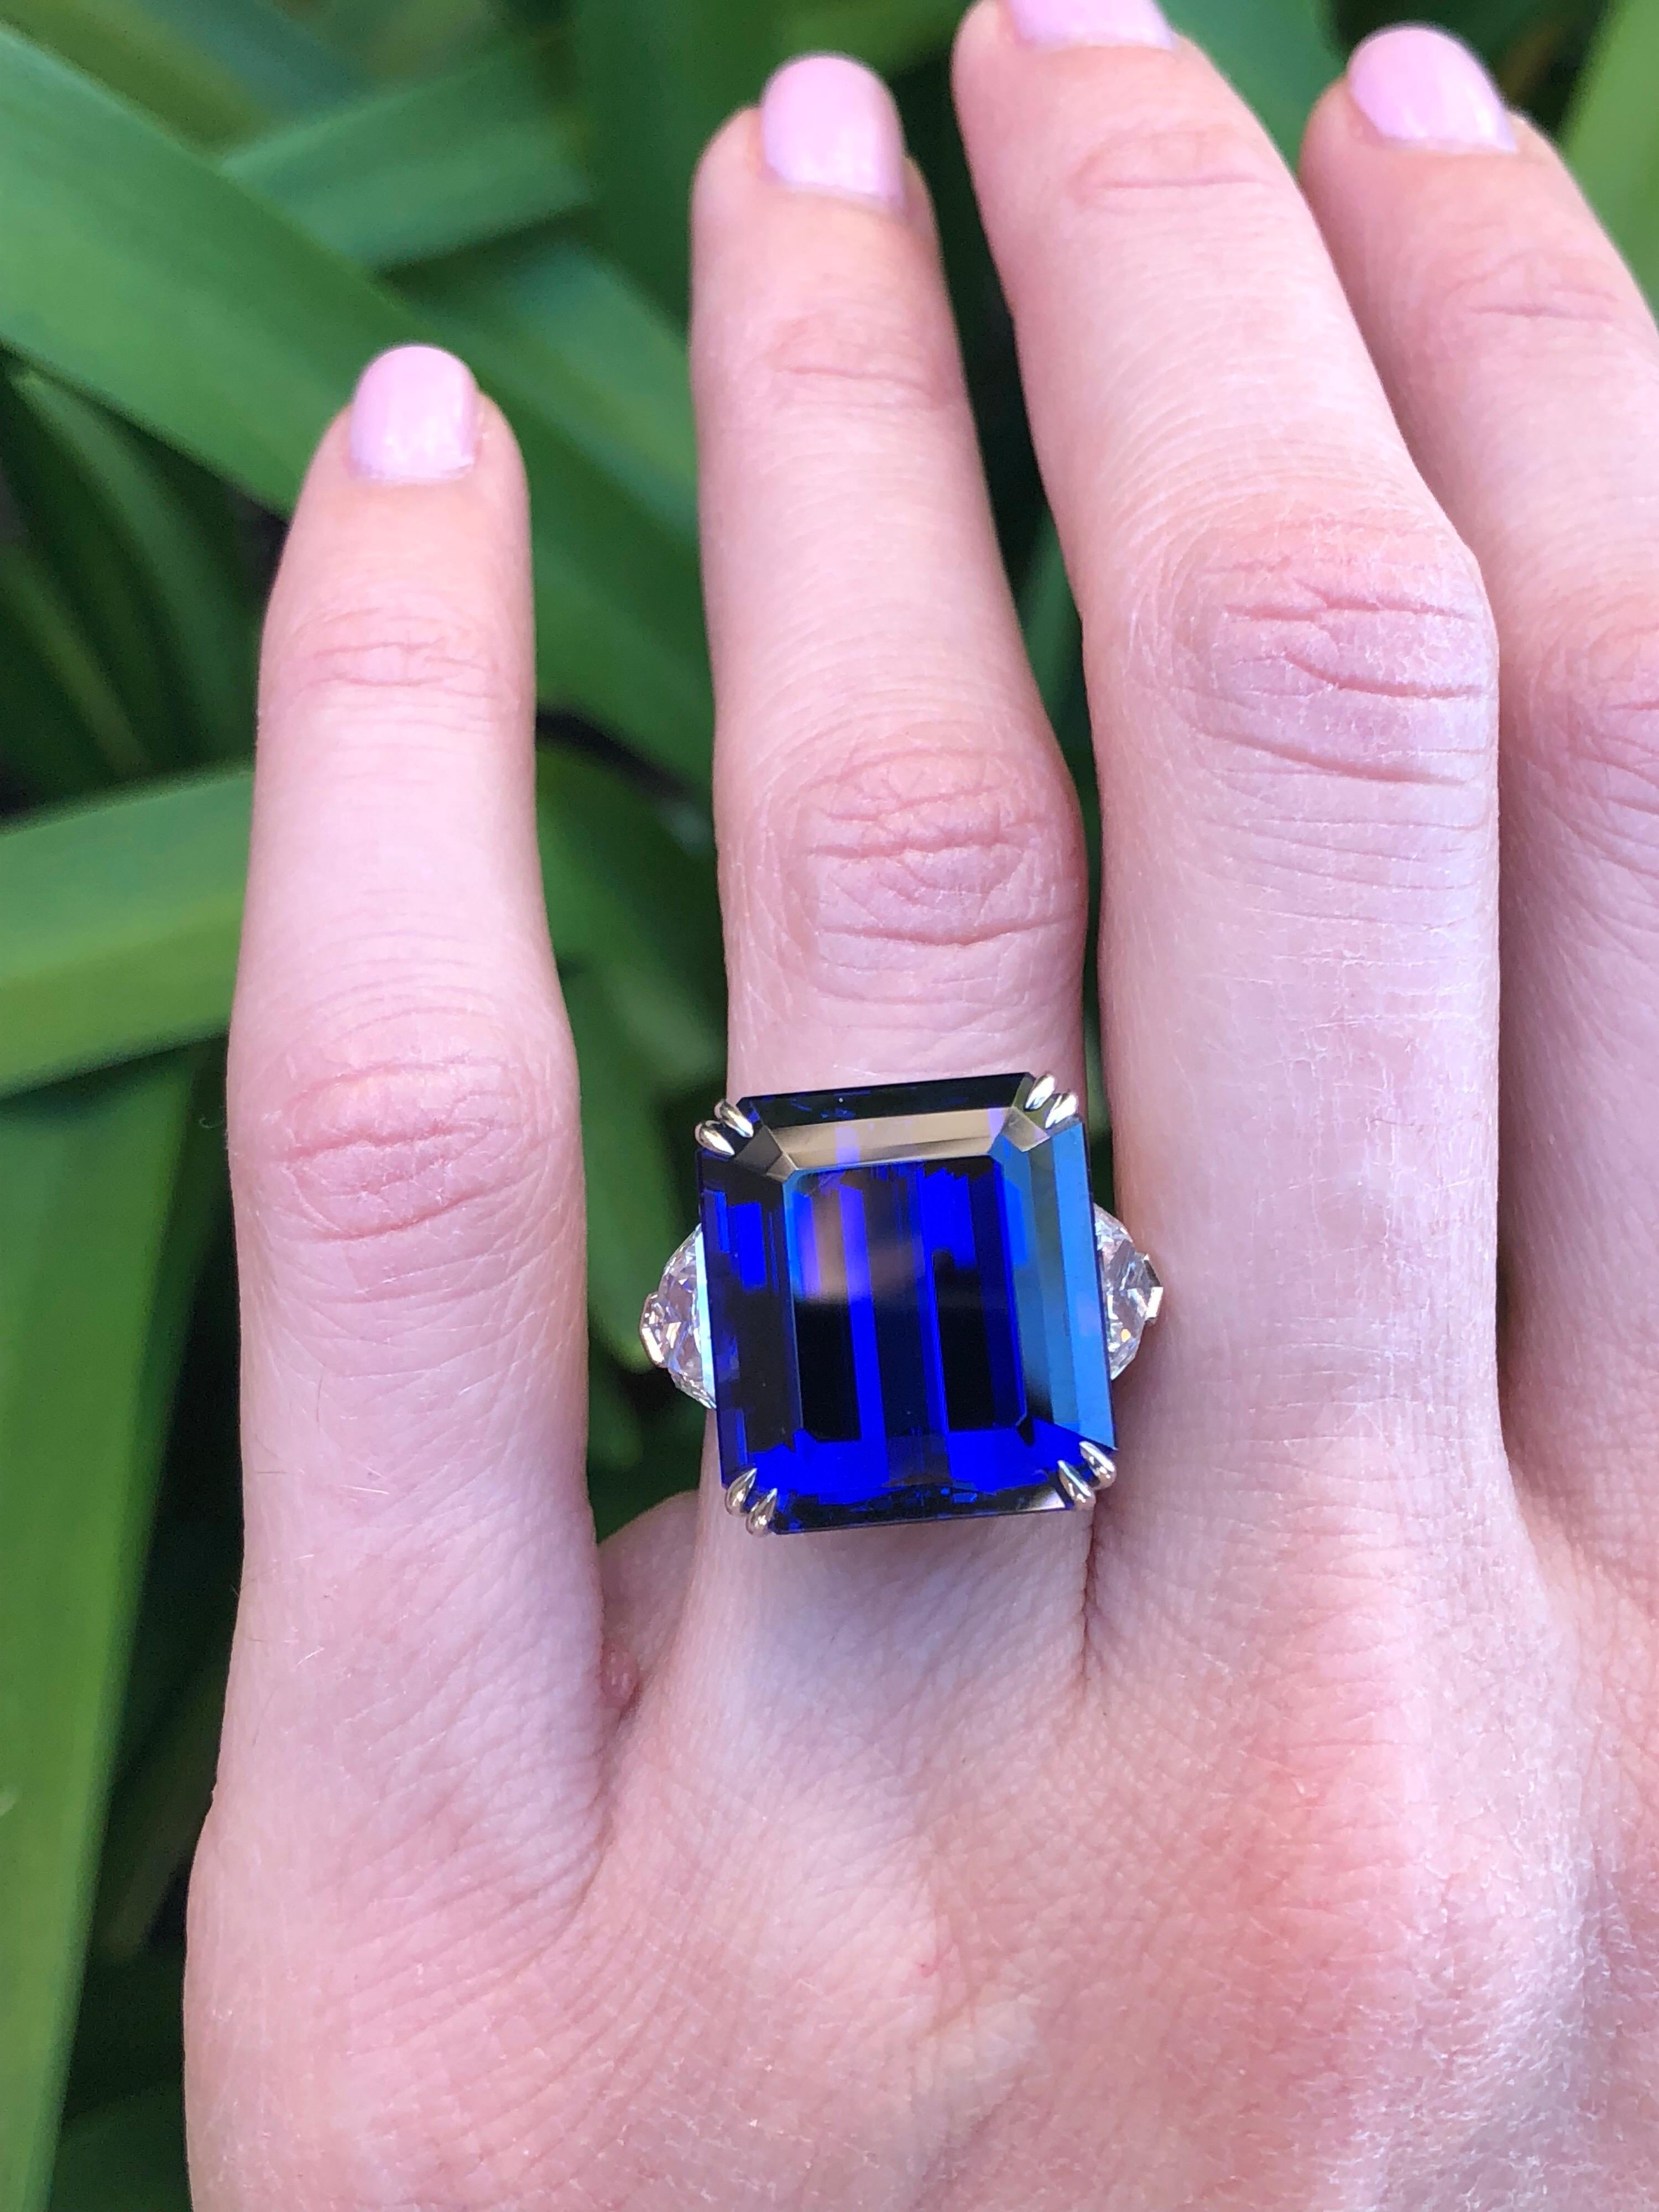 Exceptional 20.51 carat emerald-cut Tanzanite platinum ring, flanked by a pair of 2.04 carats total F/VS2 